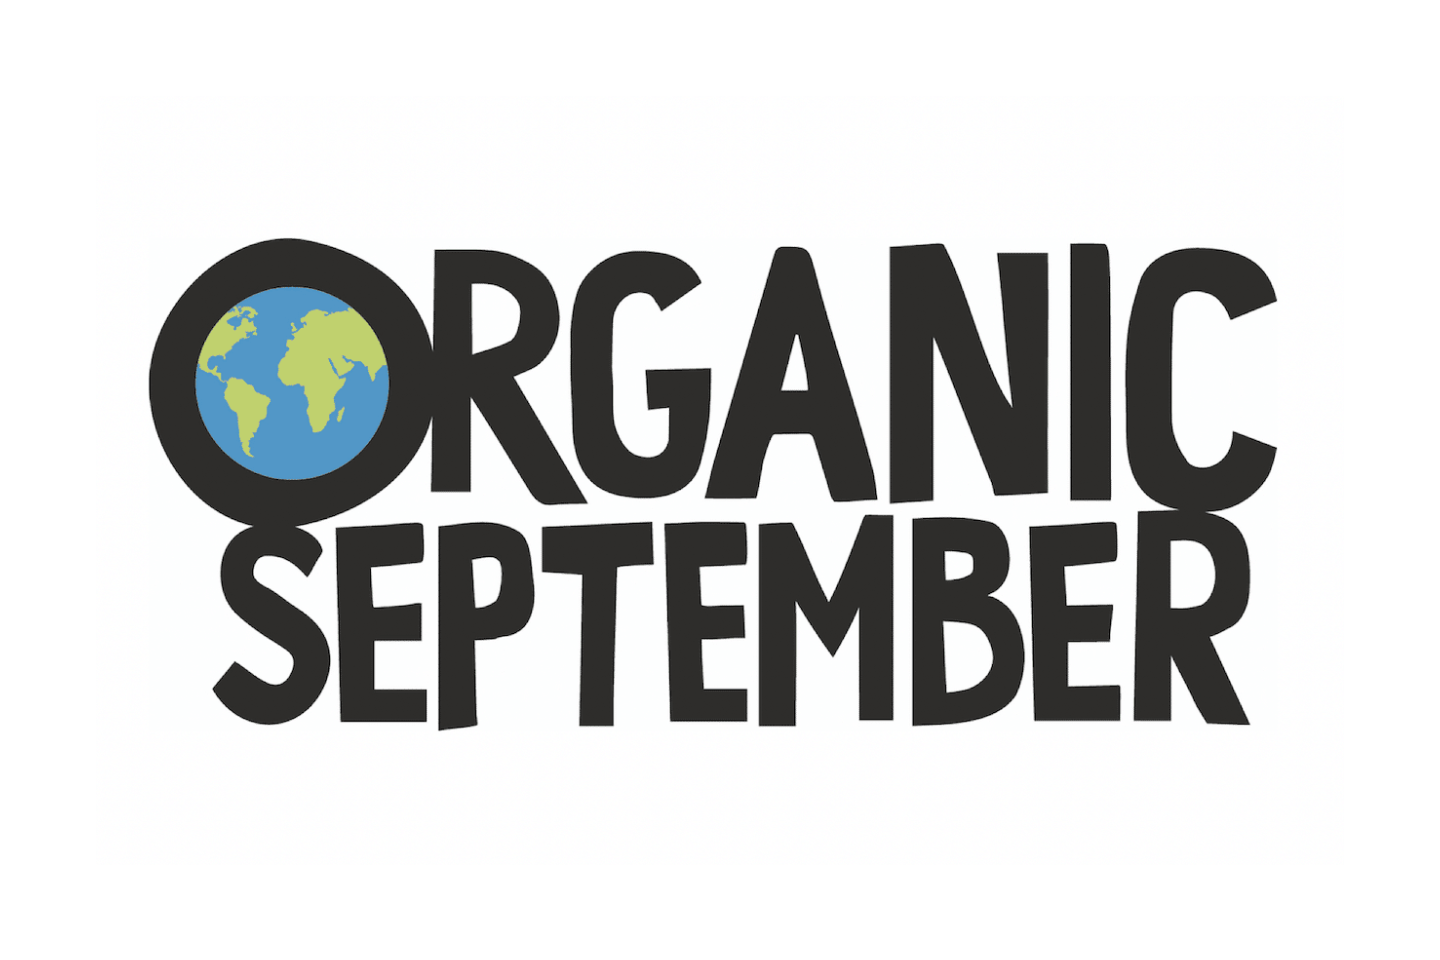 Tips and Swaps for a More Organic Lifestyle